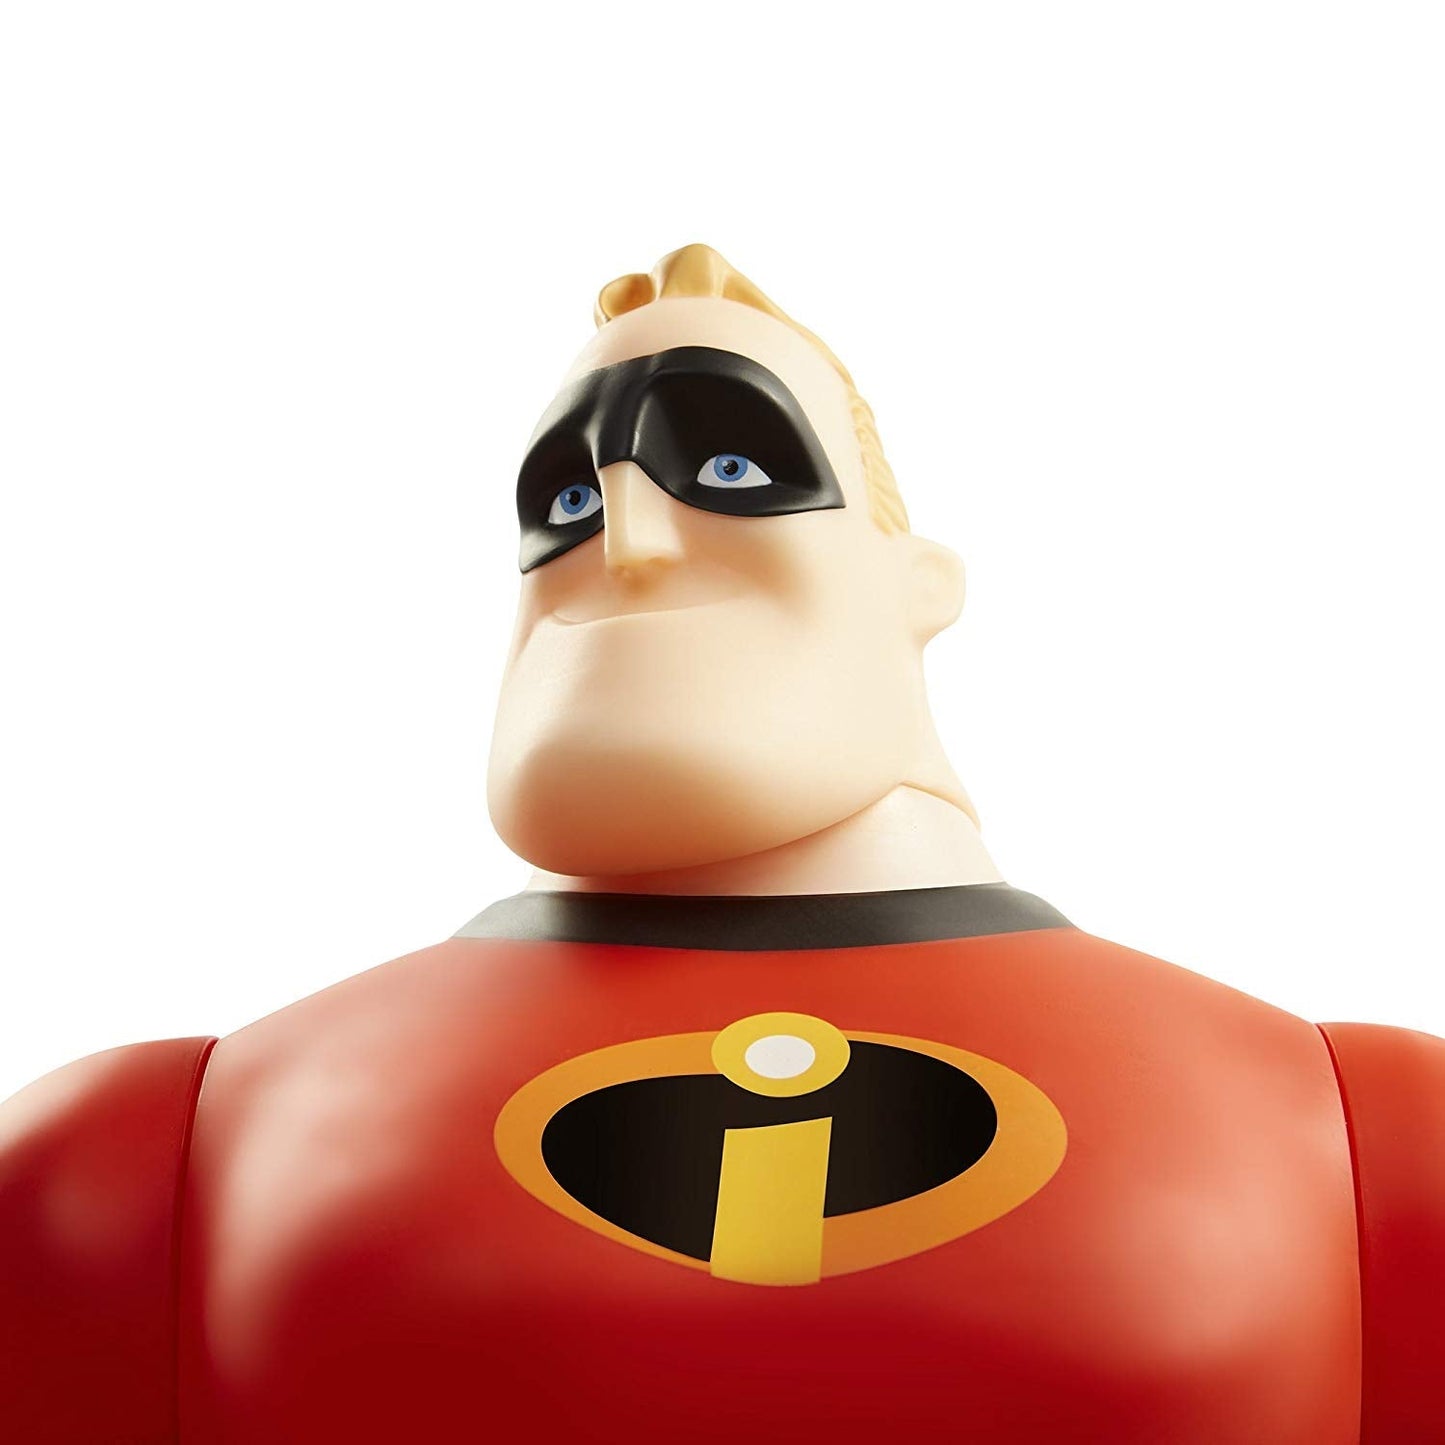 The Incredibles 2 Mr. Incredible Action Figure, 18 Inches Tall!